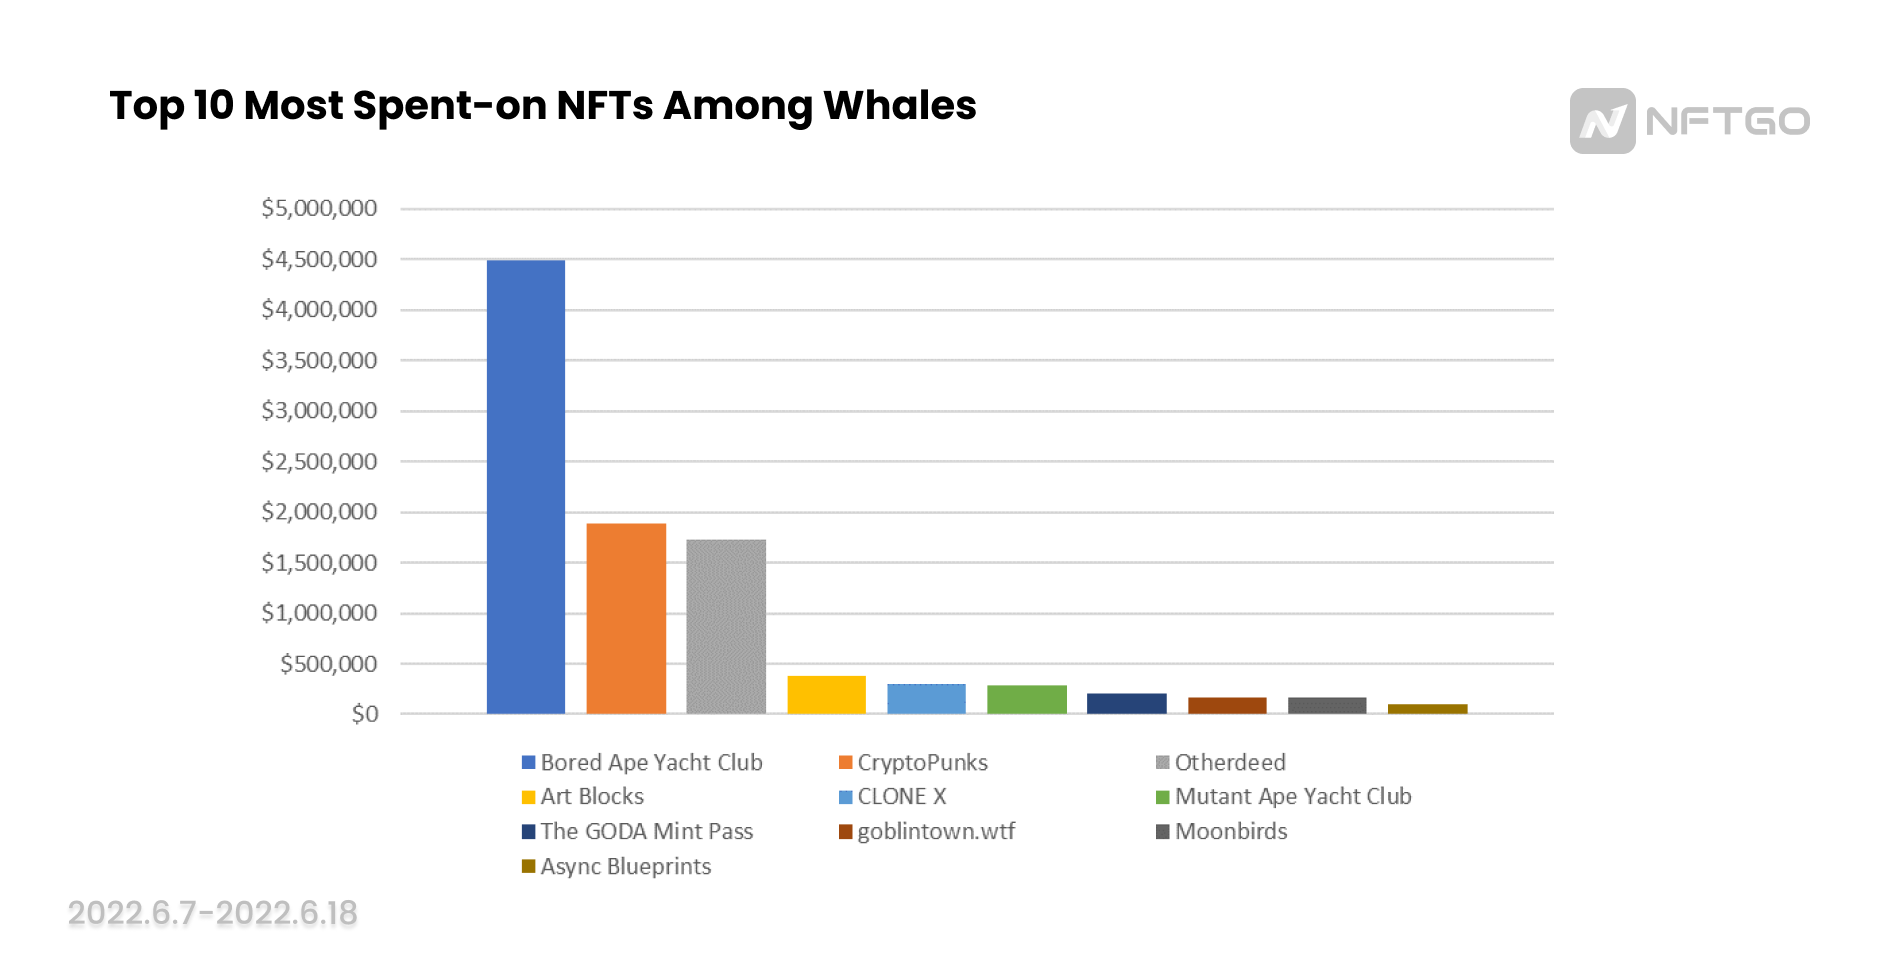 Top 10 Most Purchased NFTs Among Whales (6.7-6.18) (Source: NFTGo.io)